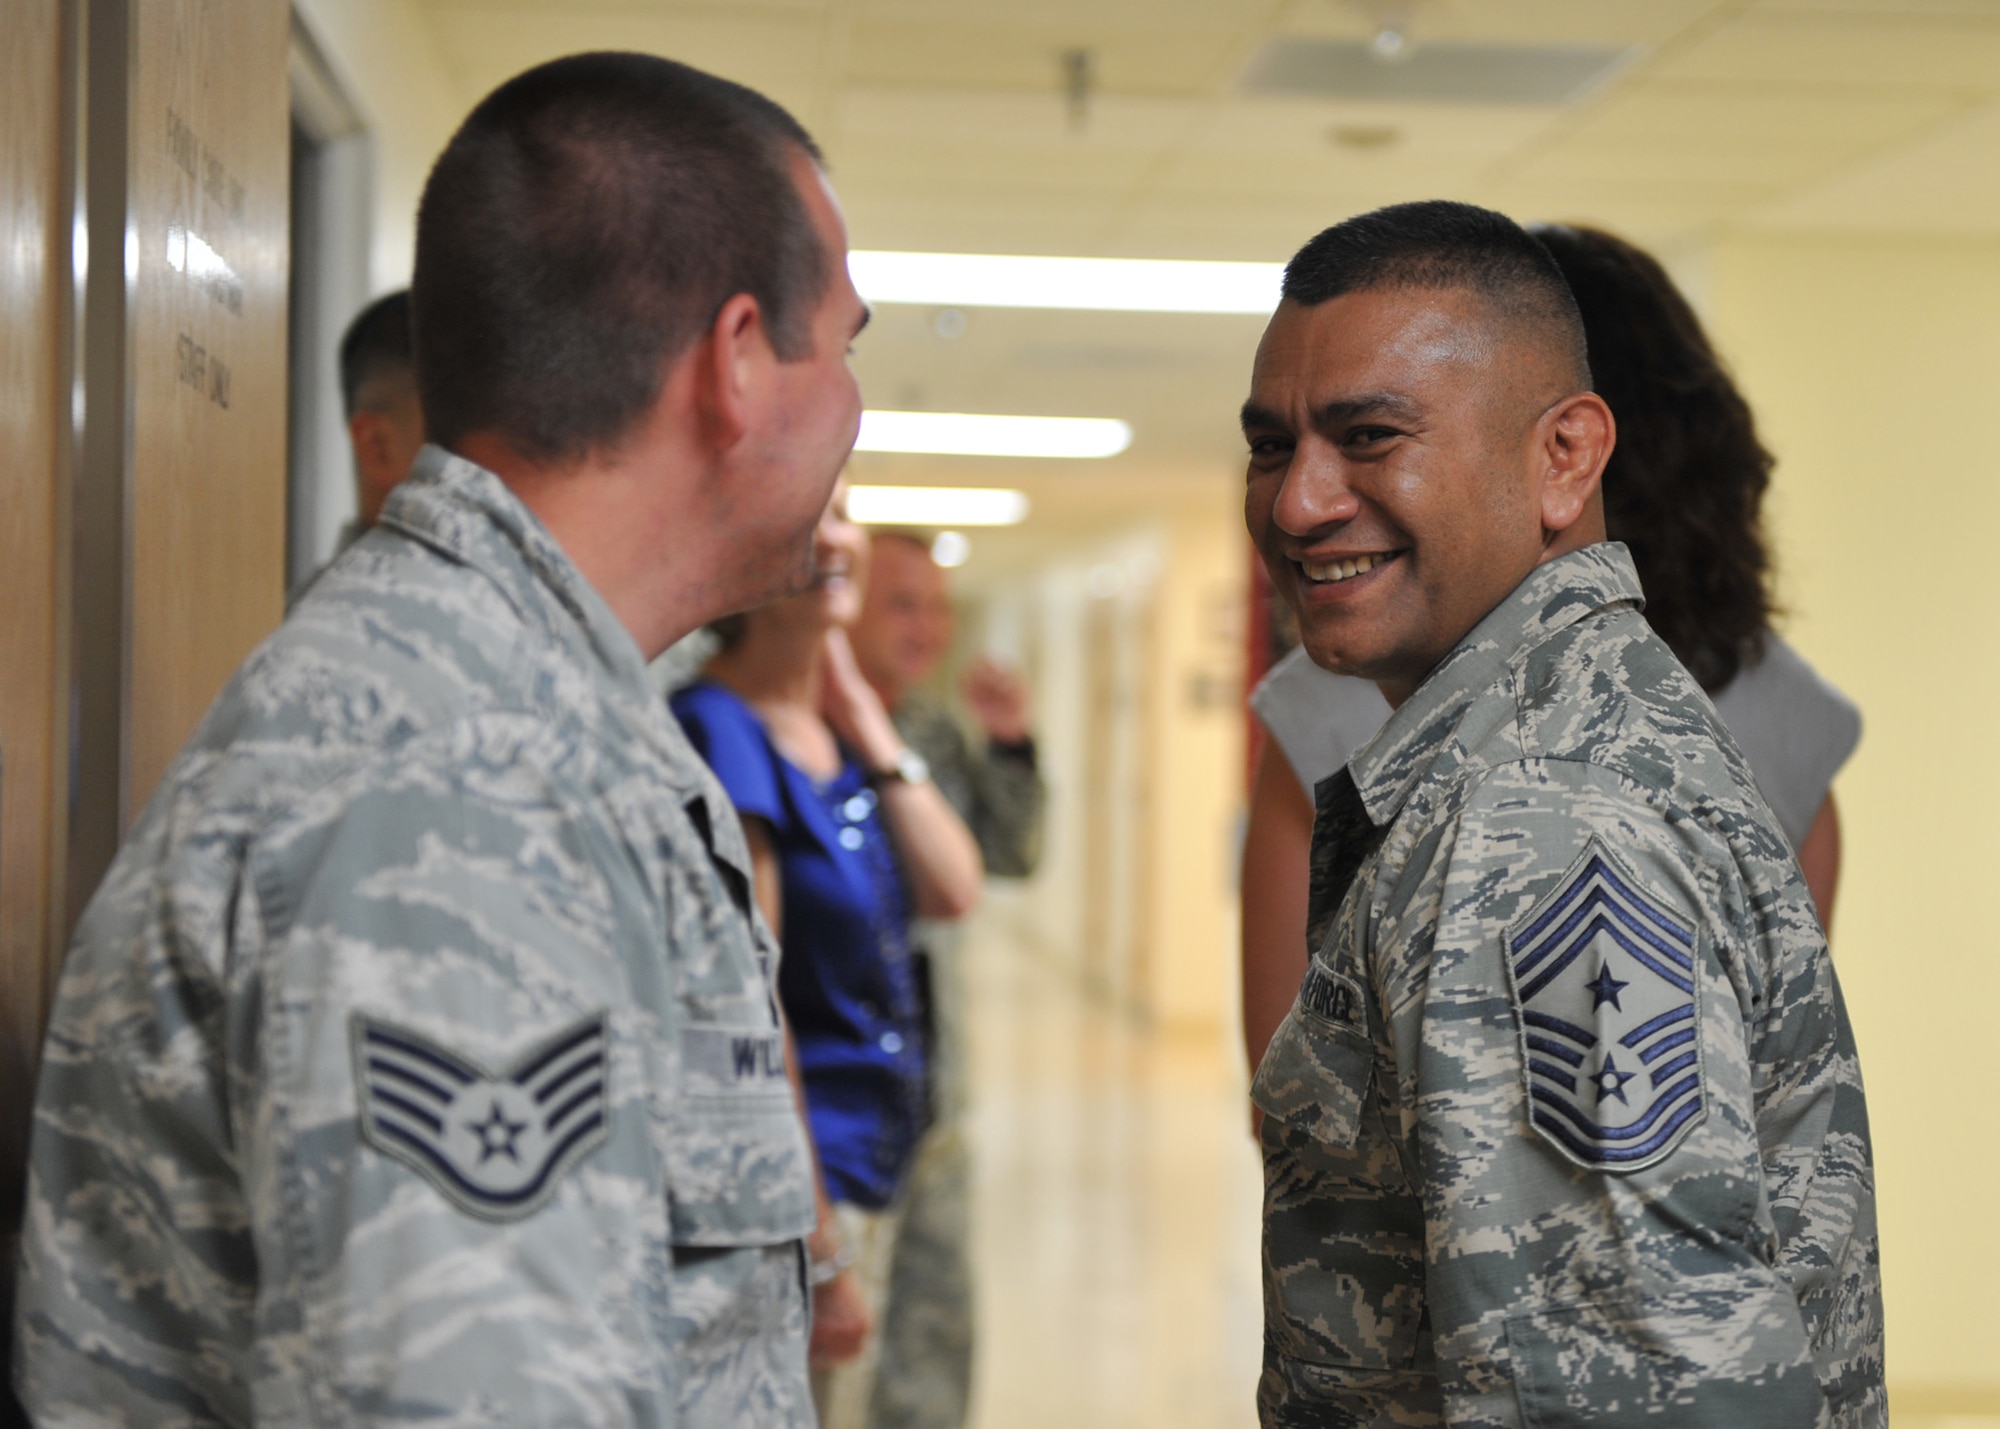 U.S. Air Force Chief Master Sgt. Gerardo Tapia Jr., 12th Air Force command chief, smiles to a staff sergeant July 10, 2012, at Mountain Home Air Force Base, Idaho. The first stop of their visit was to the 366th Medical Group to see a demonstration on the care provided during child delivery. (U.S. Air Force photo/Airman 1st Class Heather Hayward)